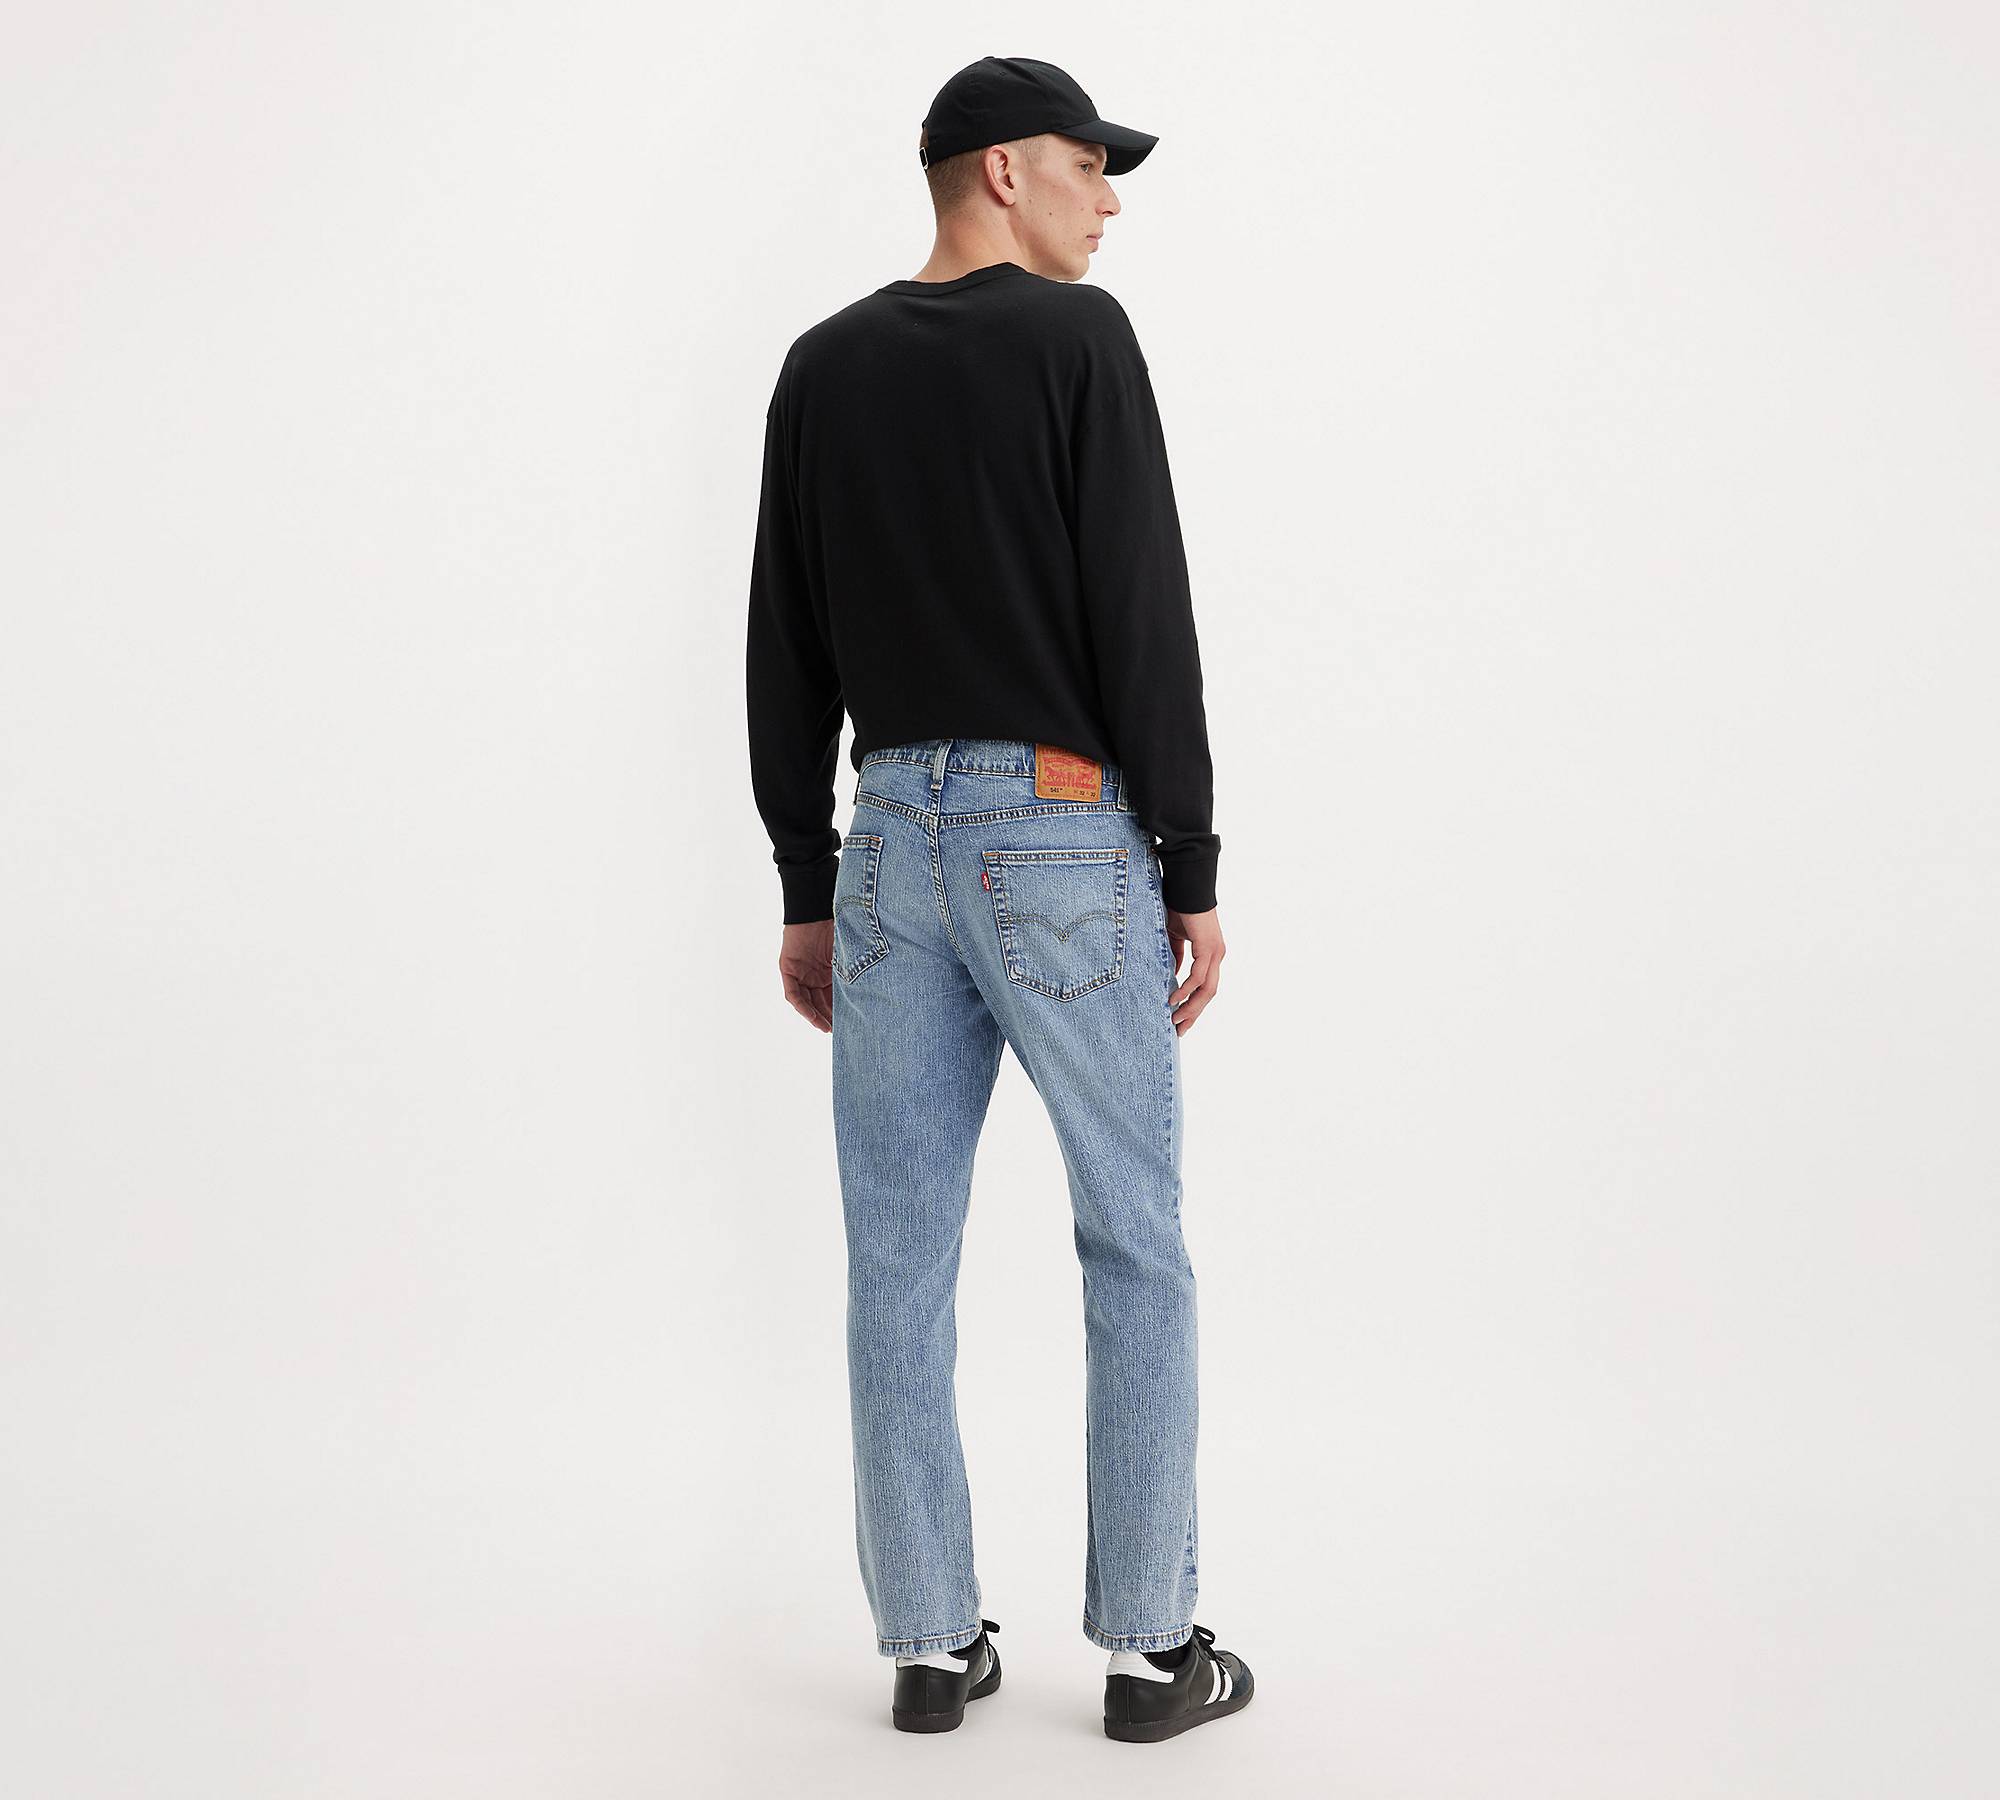 541™ Athletic Taper Jeans - Wash | Levi's® US